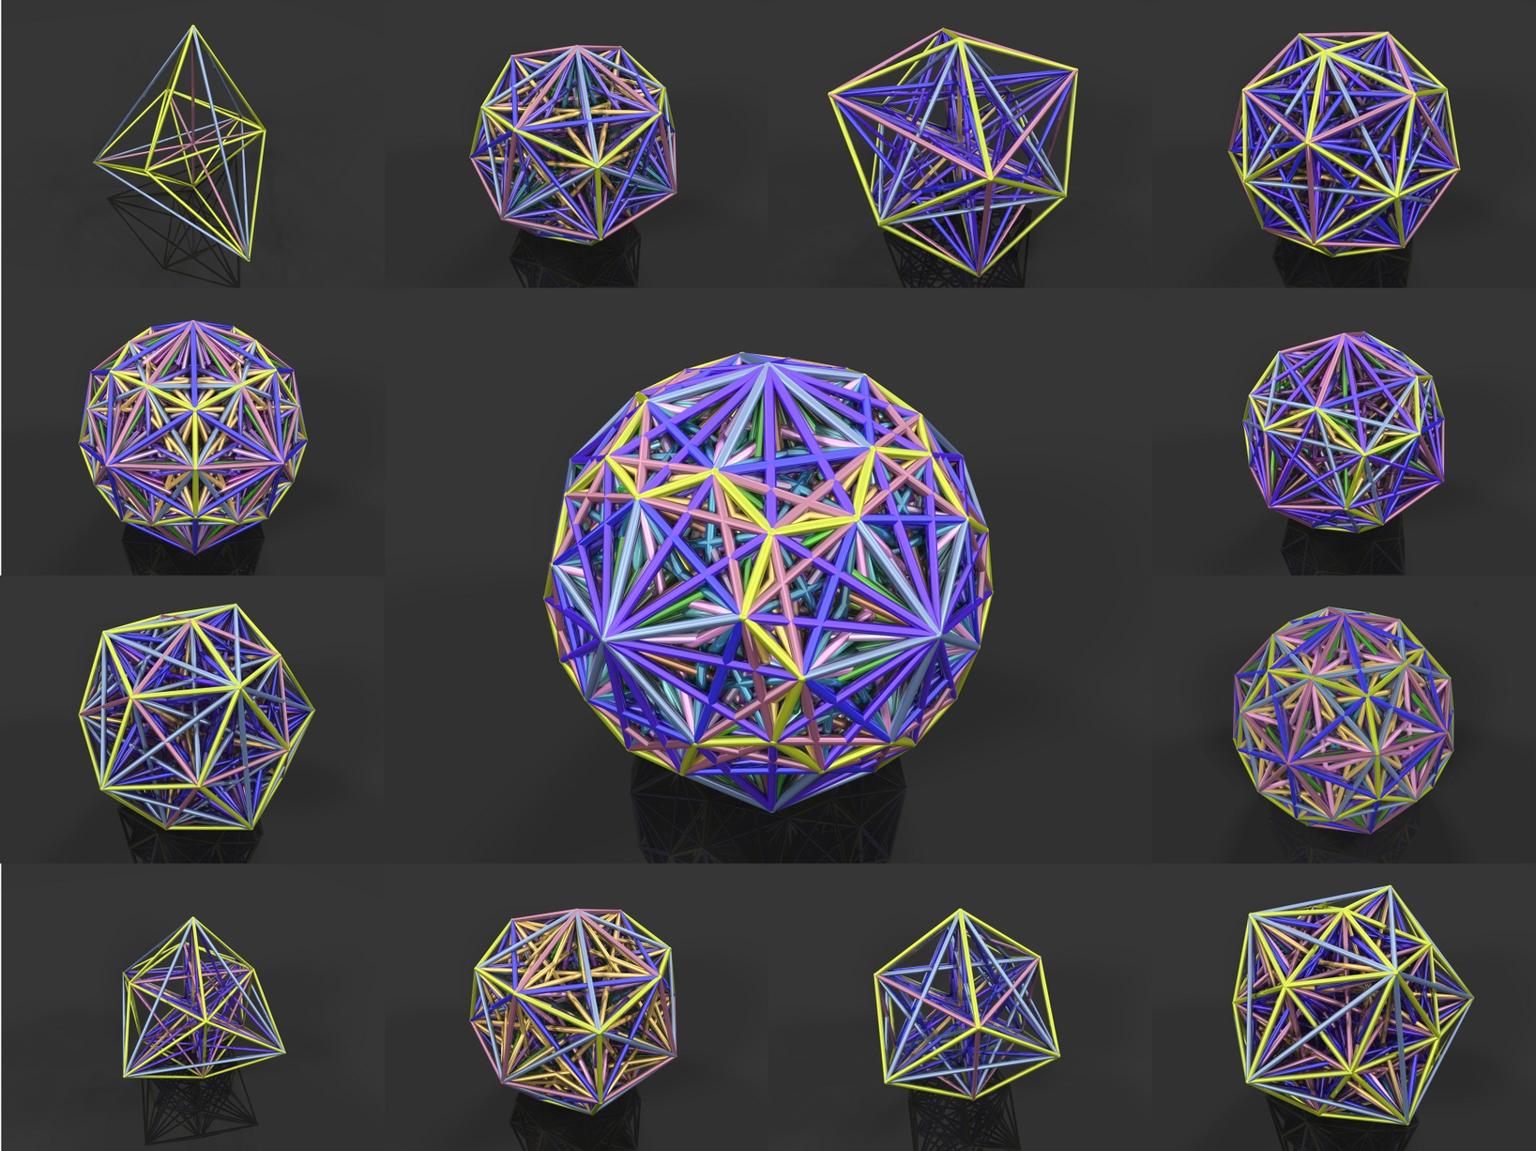 Image for entry 'All the edges of all the Catalan solids'